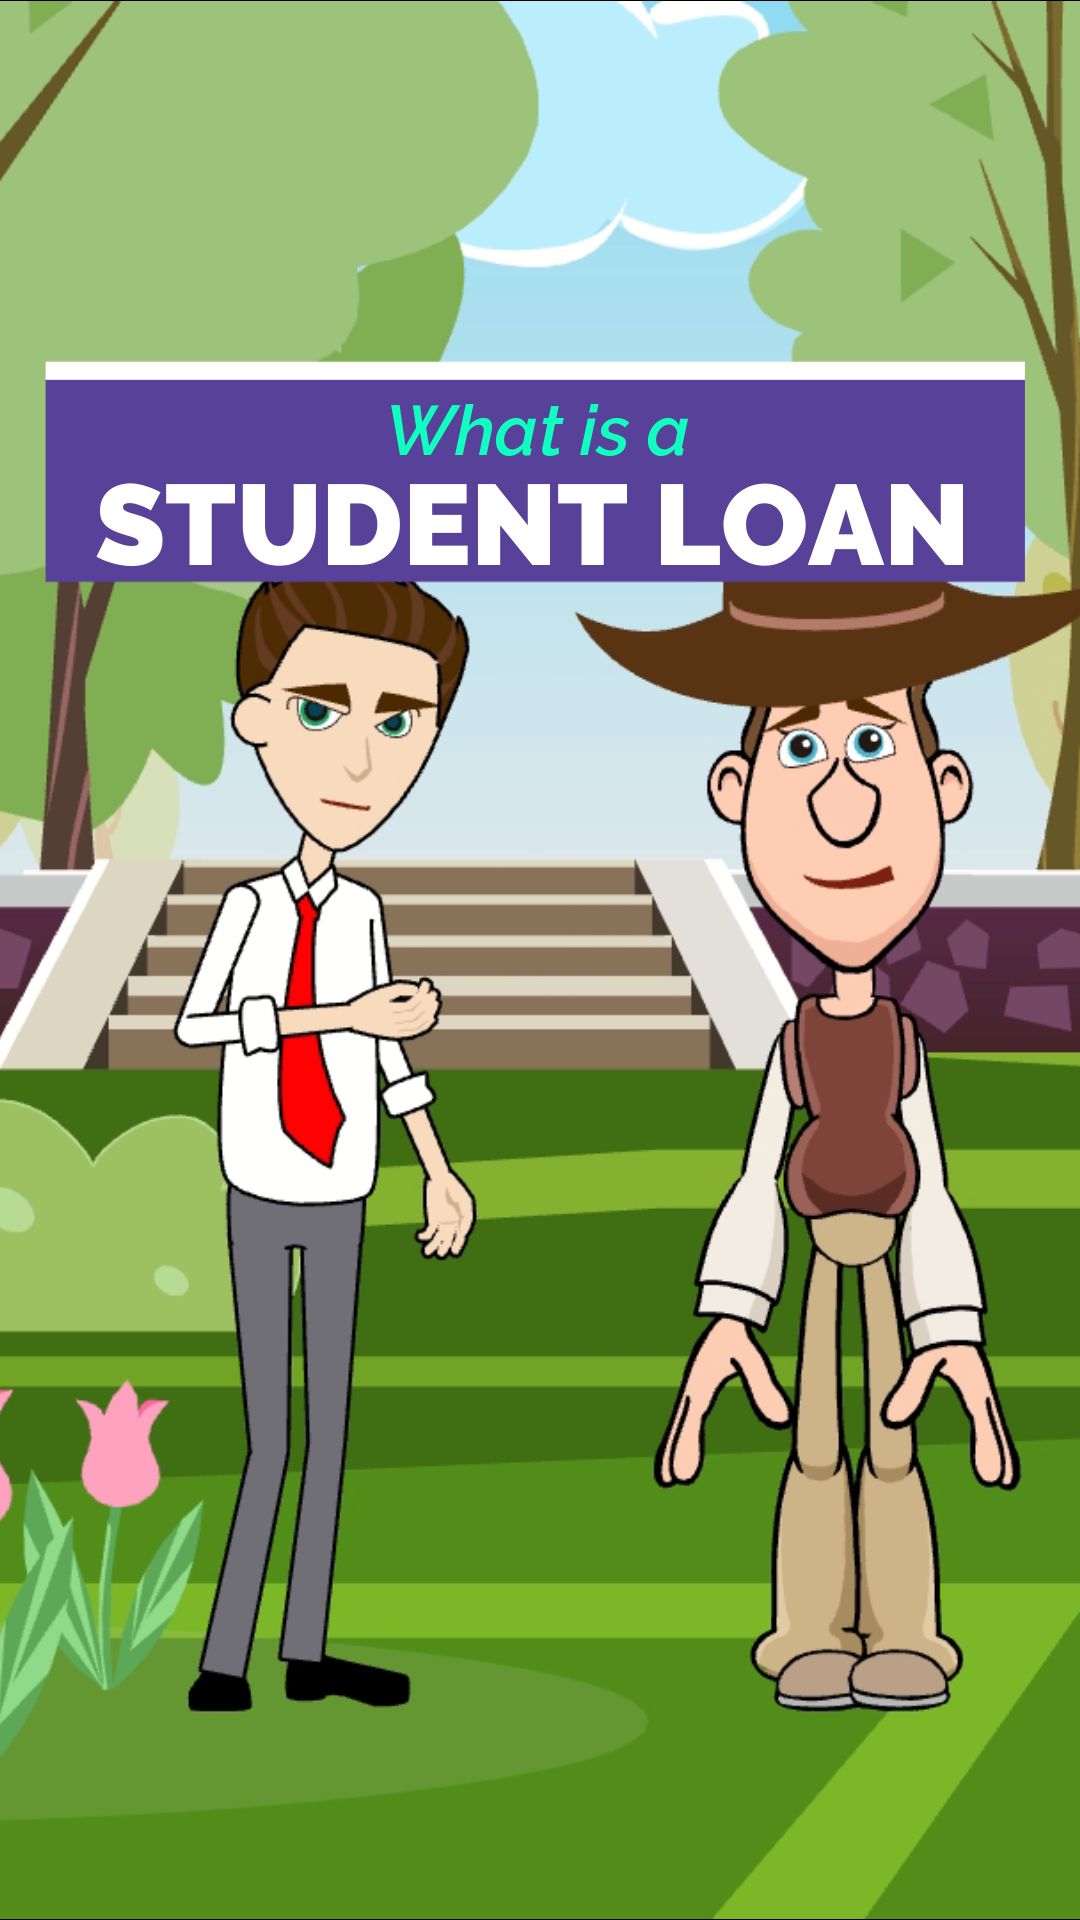 067 What is a student loan - Shorts